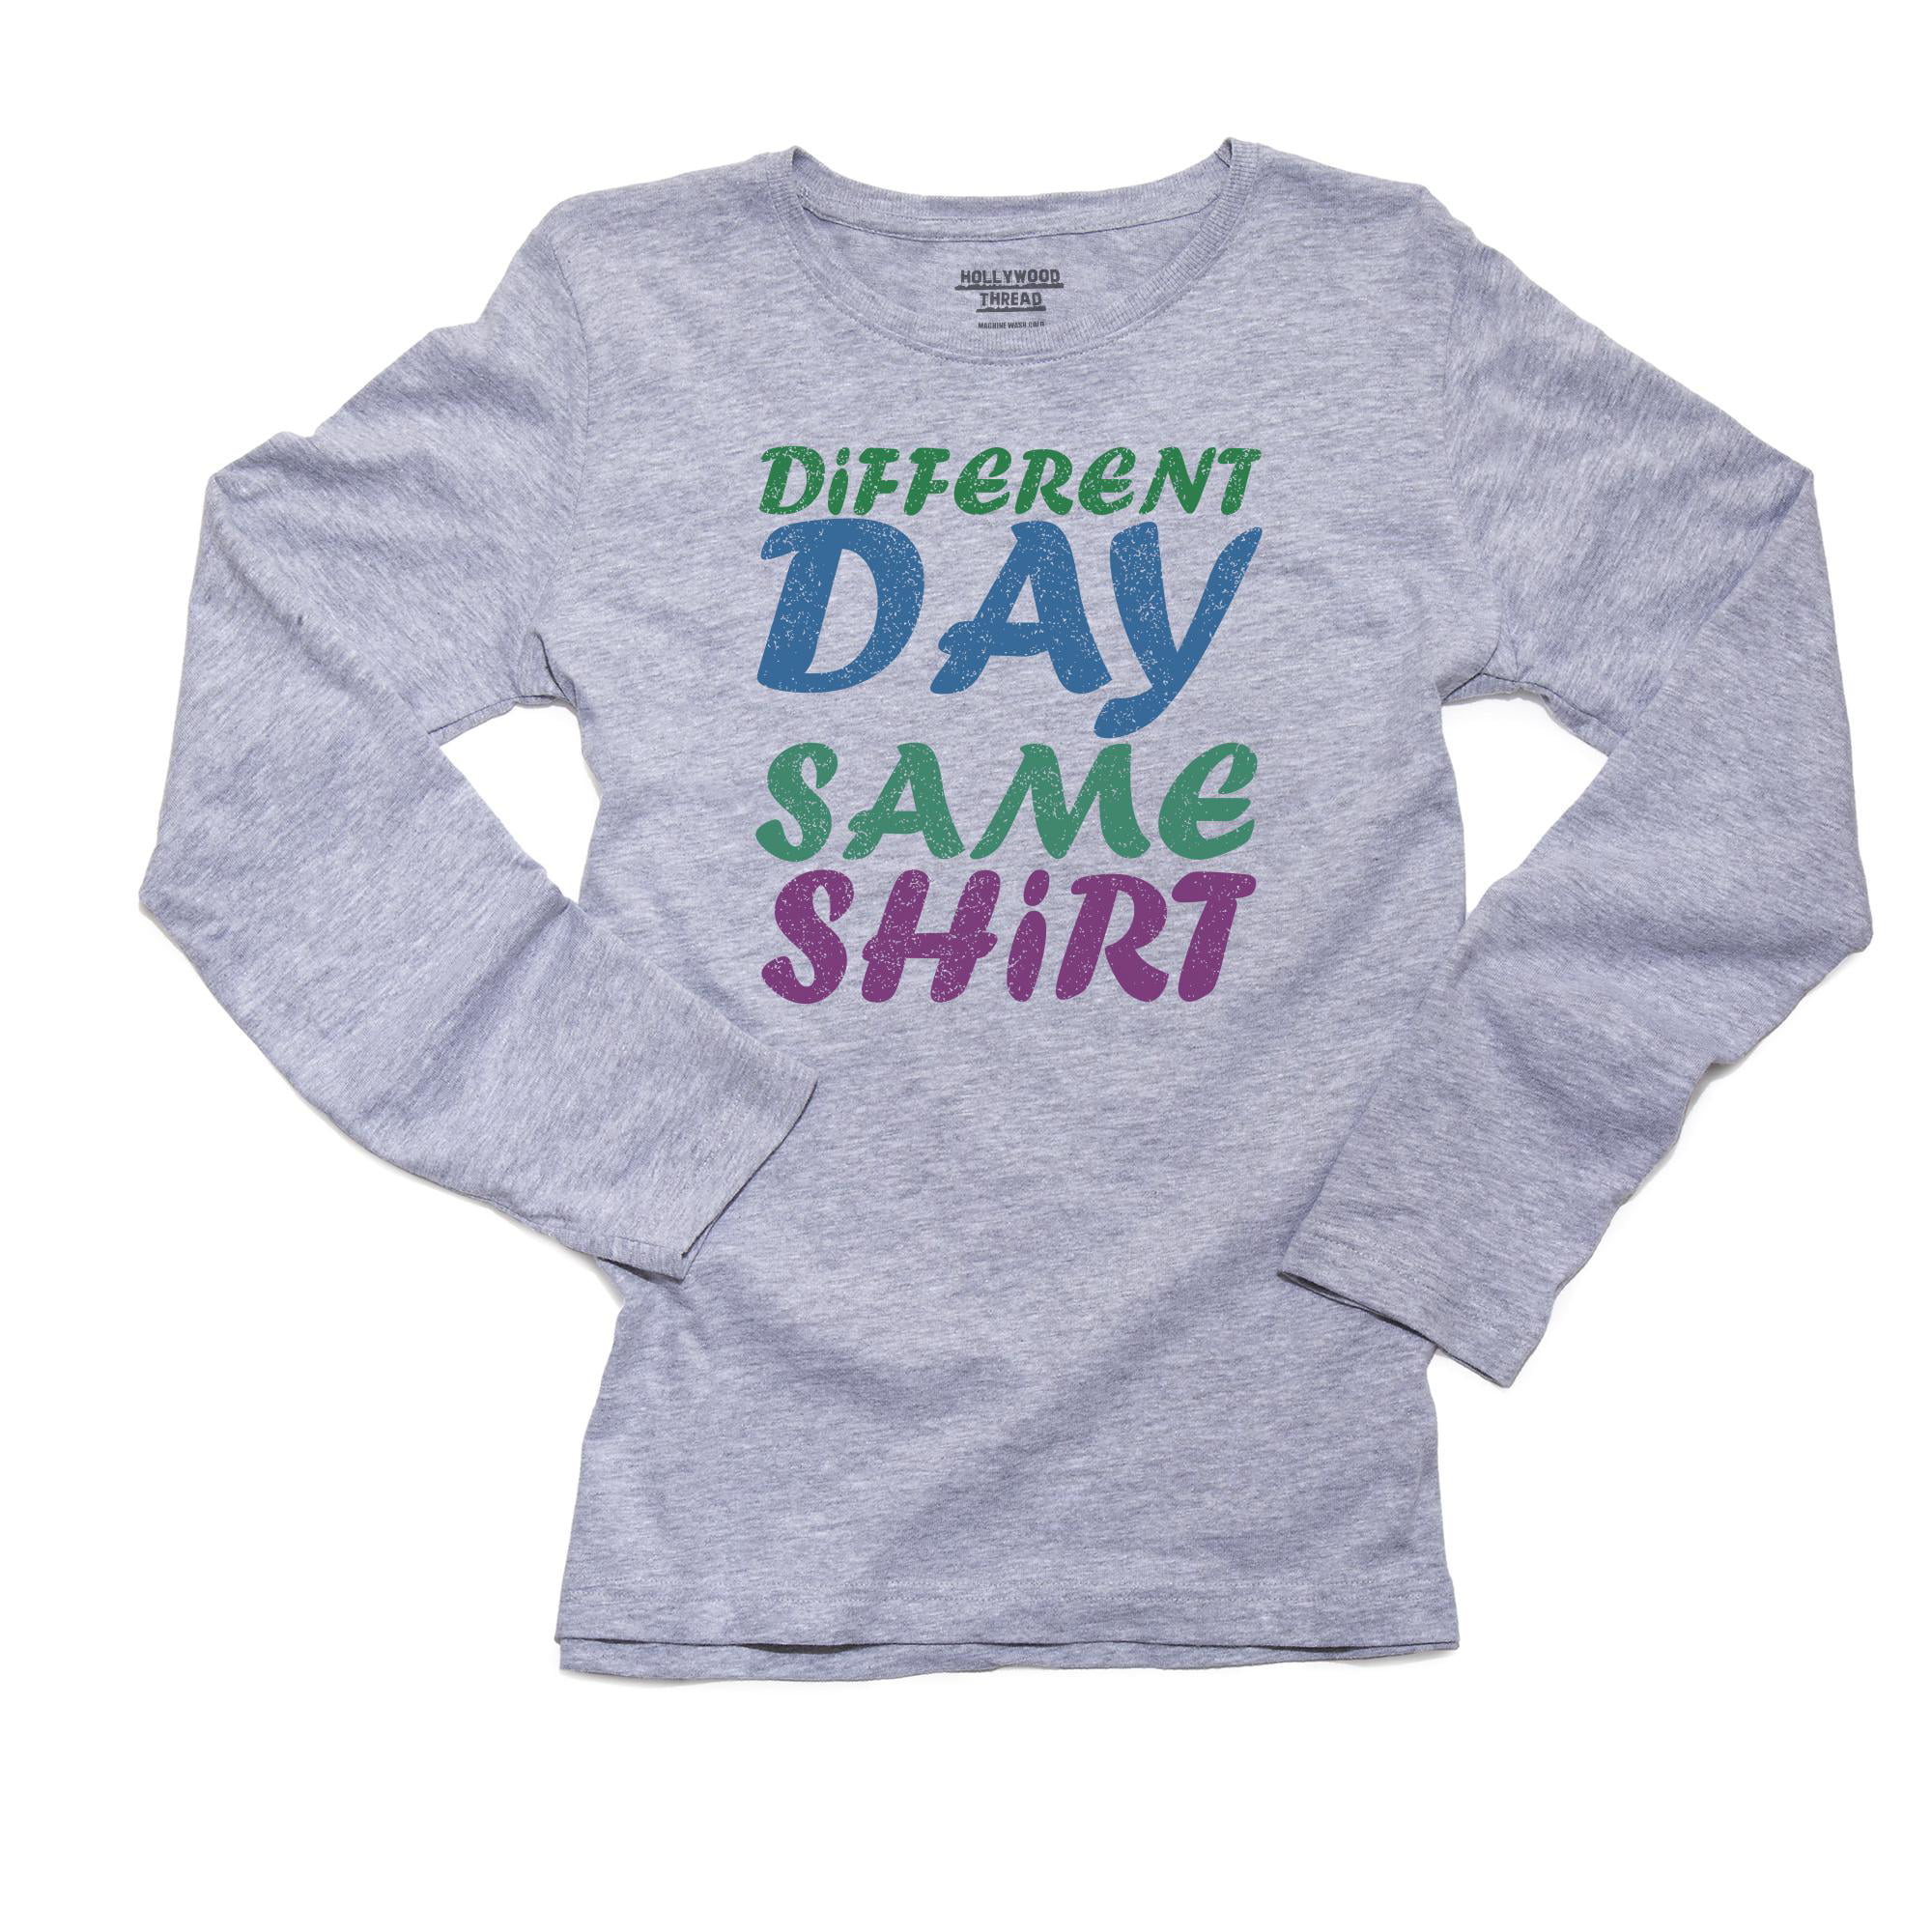 Different Day Same Shirt - Funny Play on Words Women's Long Sleeve Grey  T-Shirt 